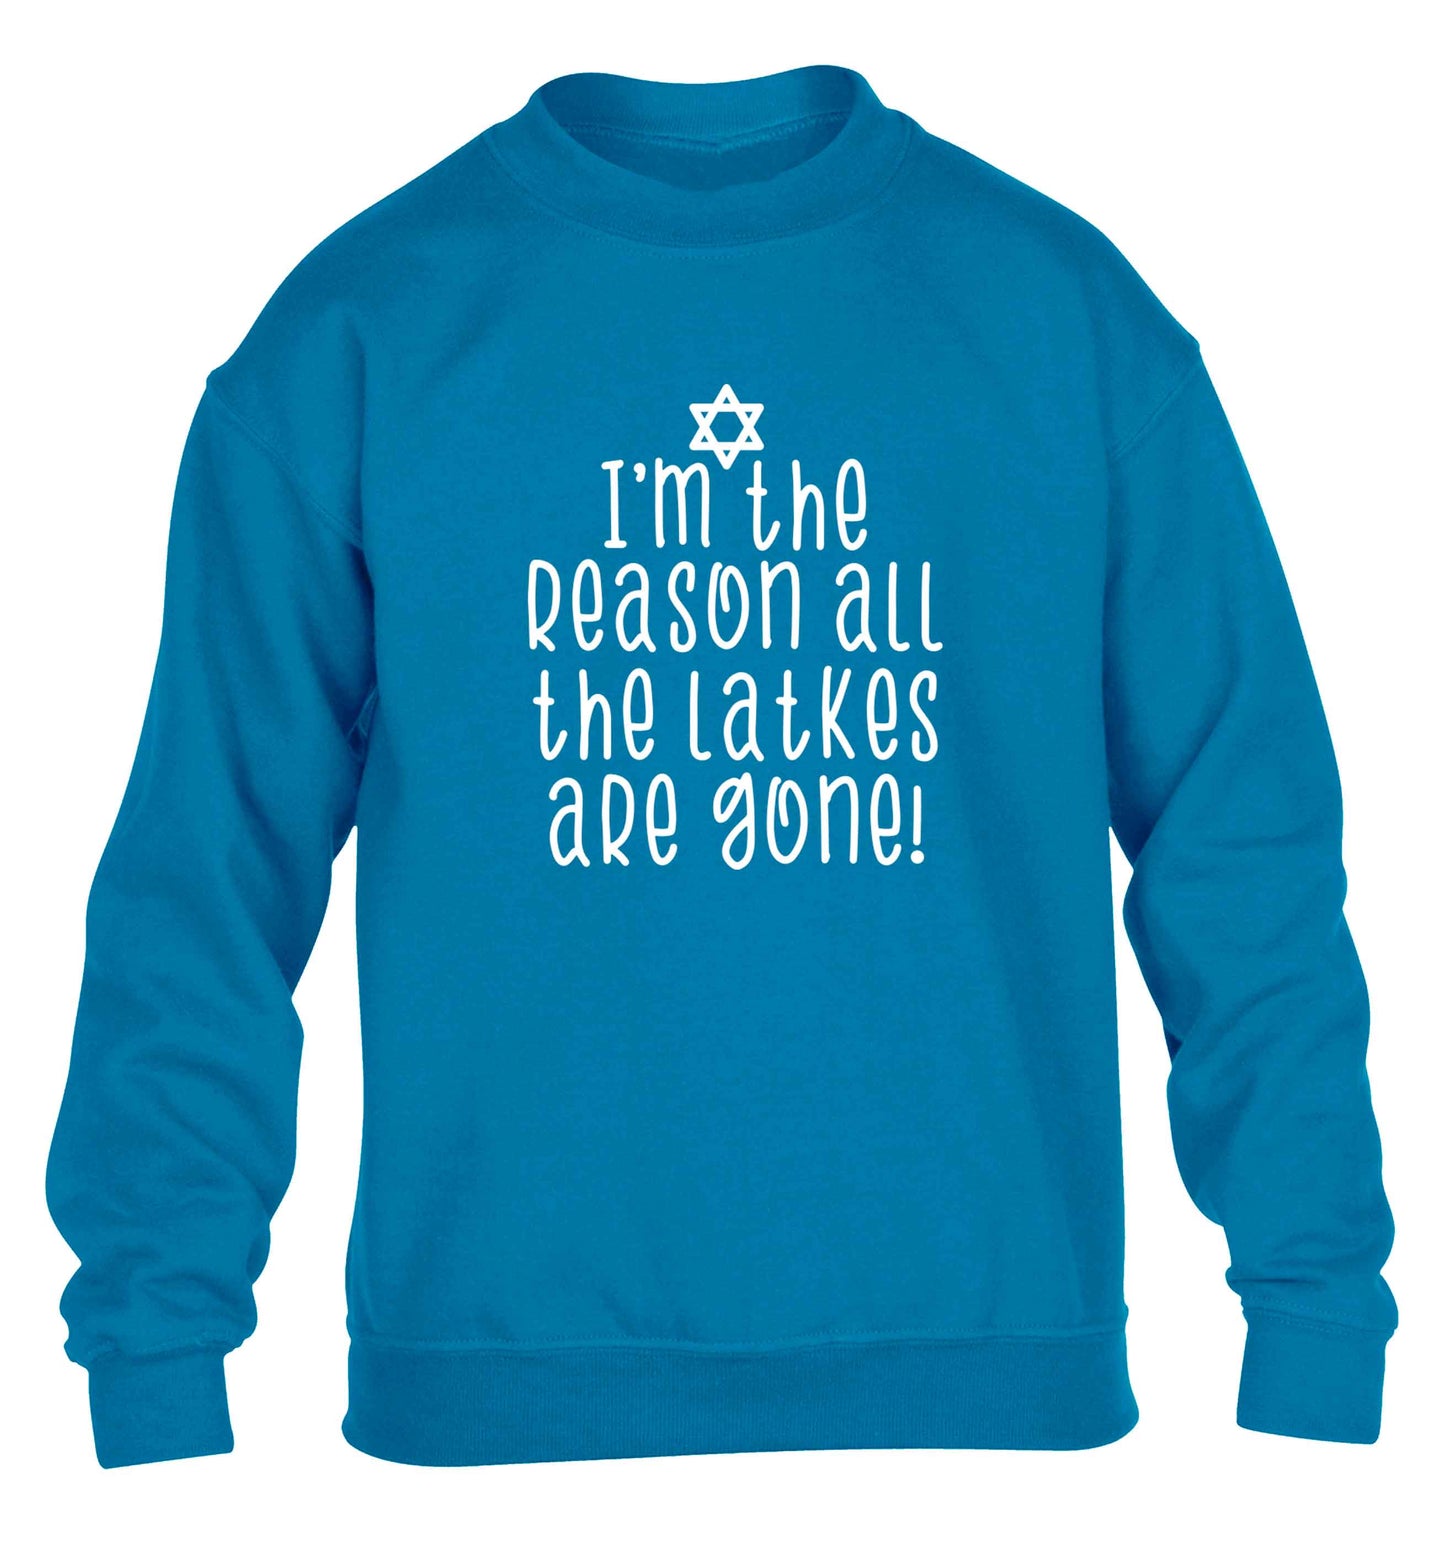 I'm the reason all the latkes are gone children's blue sweater 12-13 Years